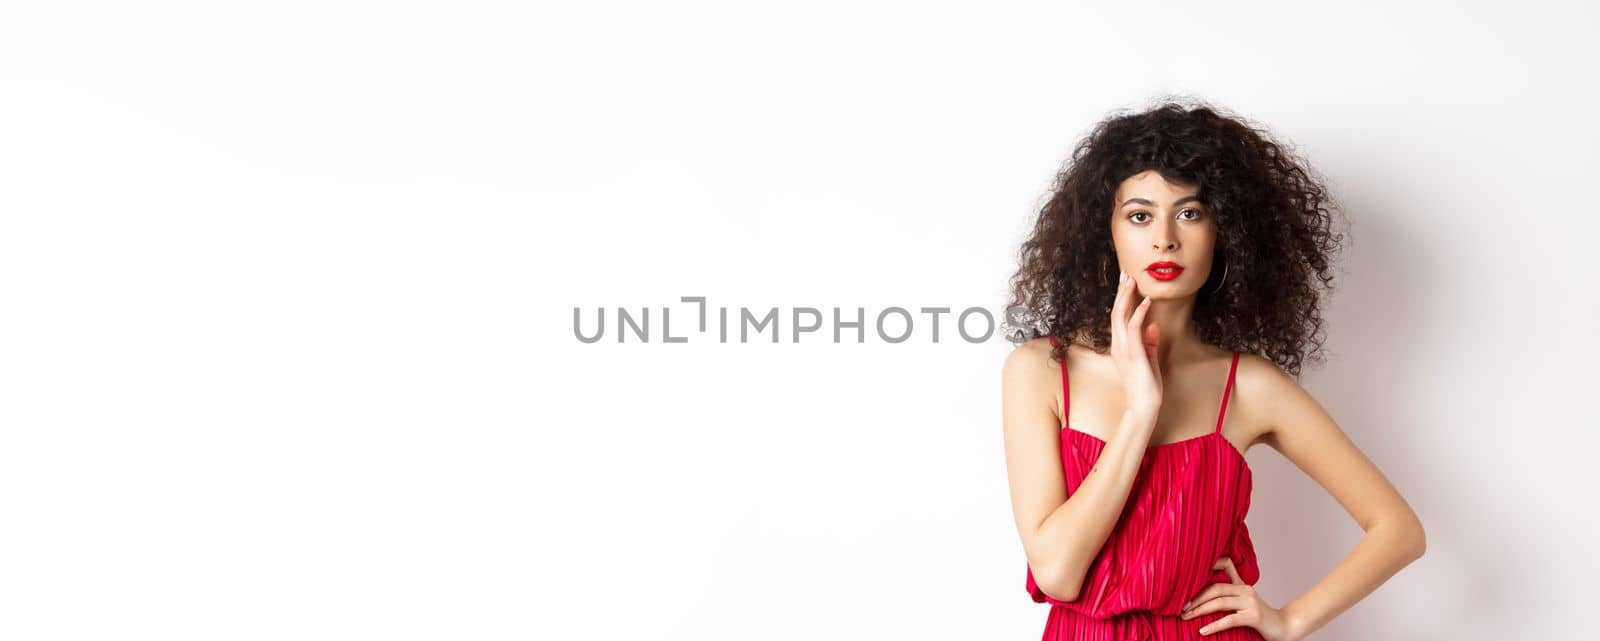 Beauty and fashion. Sensual female model with curly hair and red lips, wearing elegant dress, touching face and looking seductive, white background.